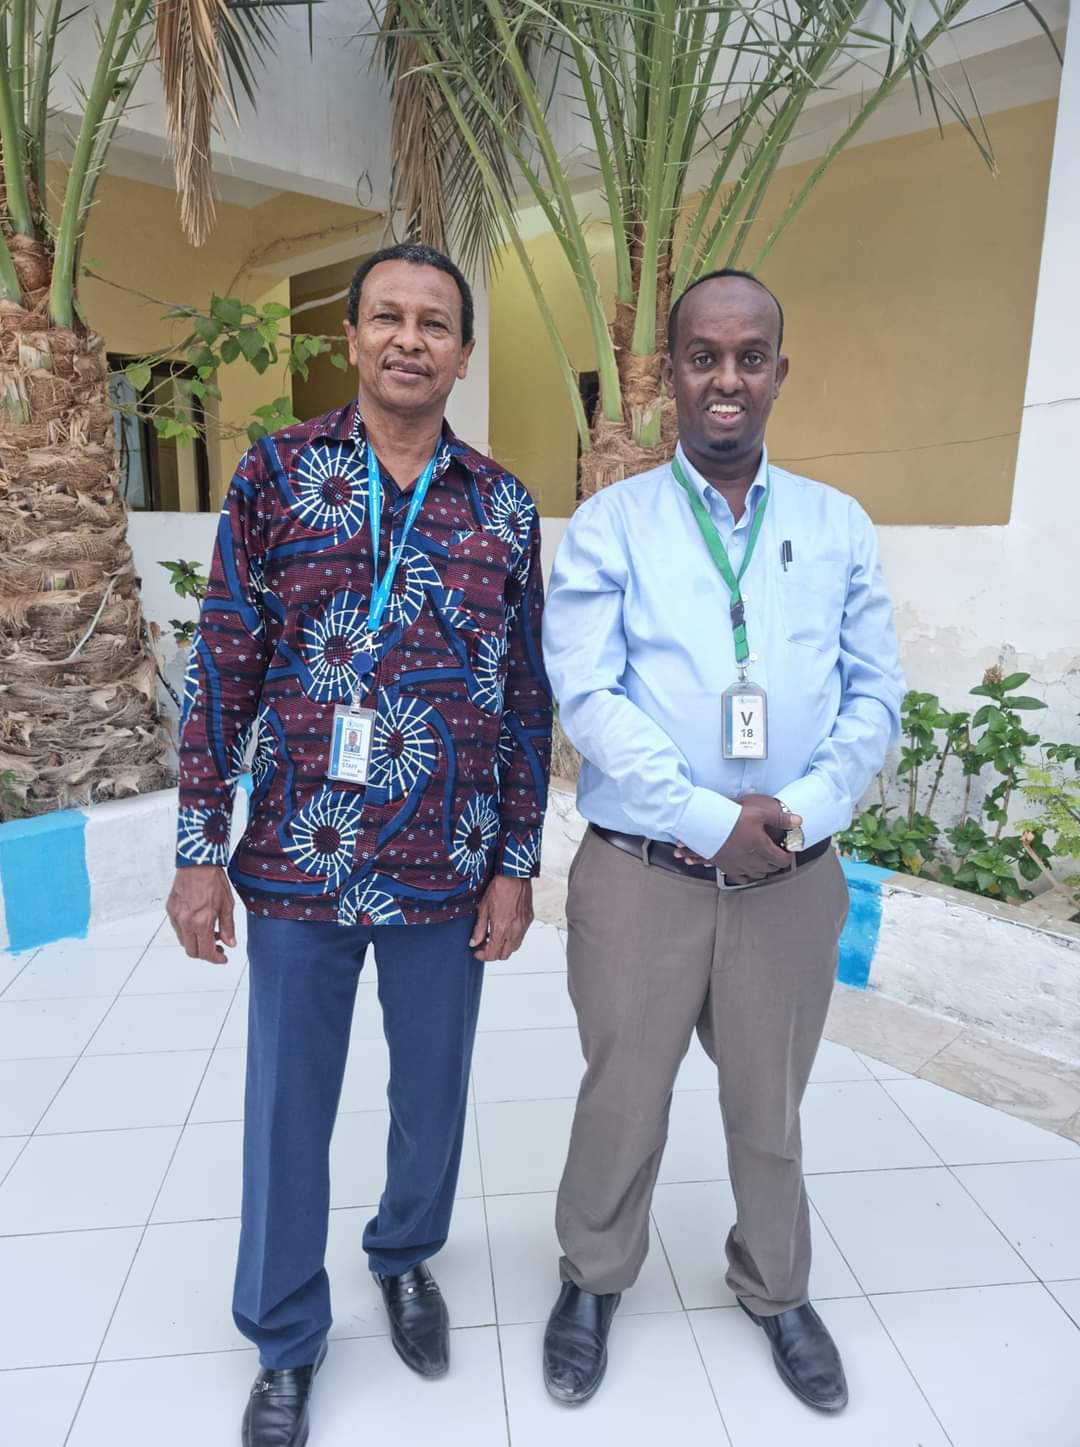 The Representative and Country Director of the World Food Programme (WFP) Somalia, met with the Executive Director of the national non-governmental organization HIDA .